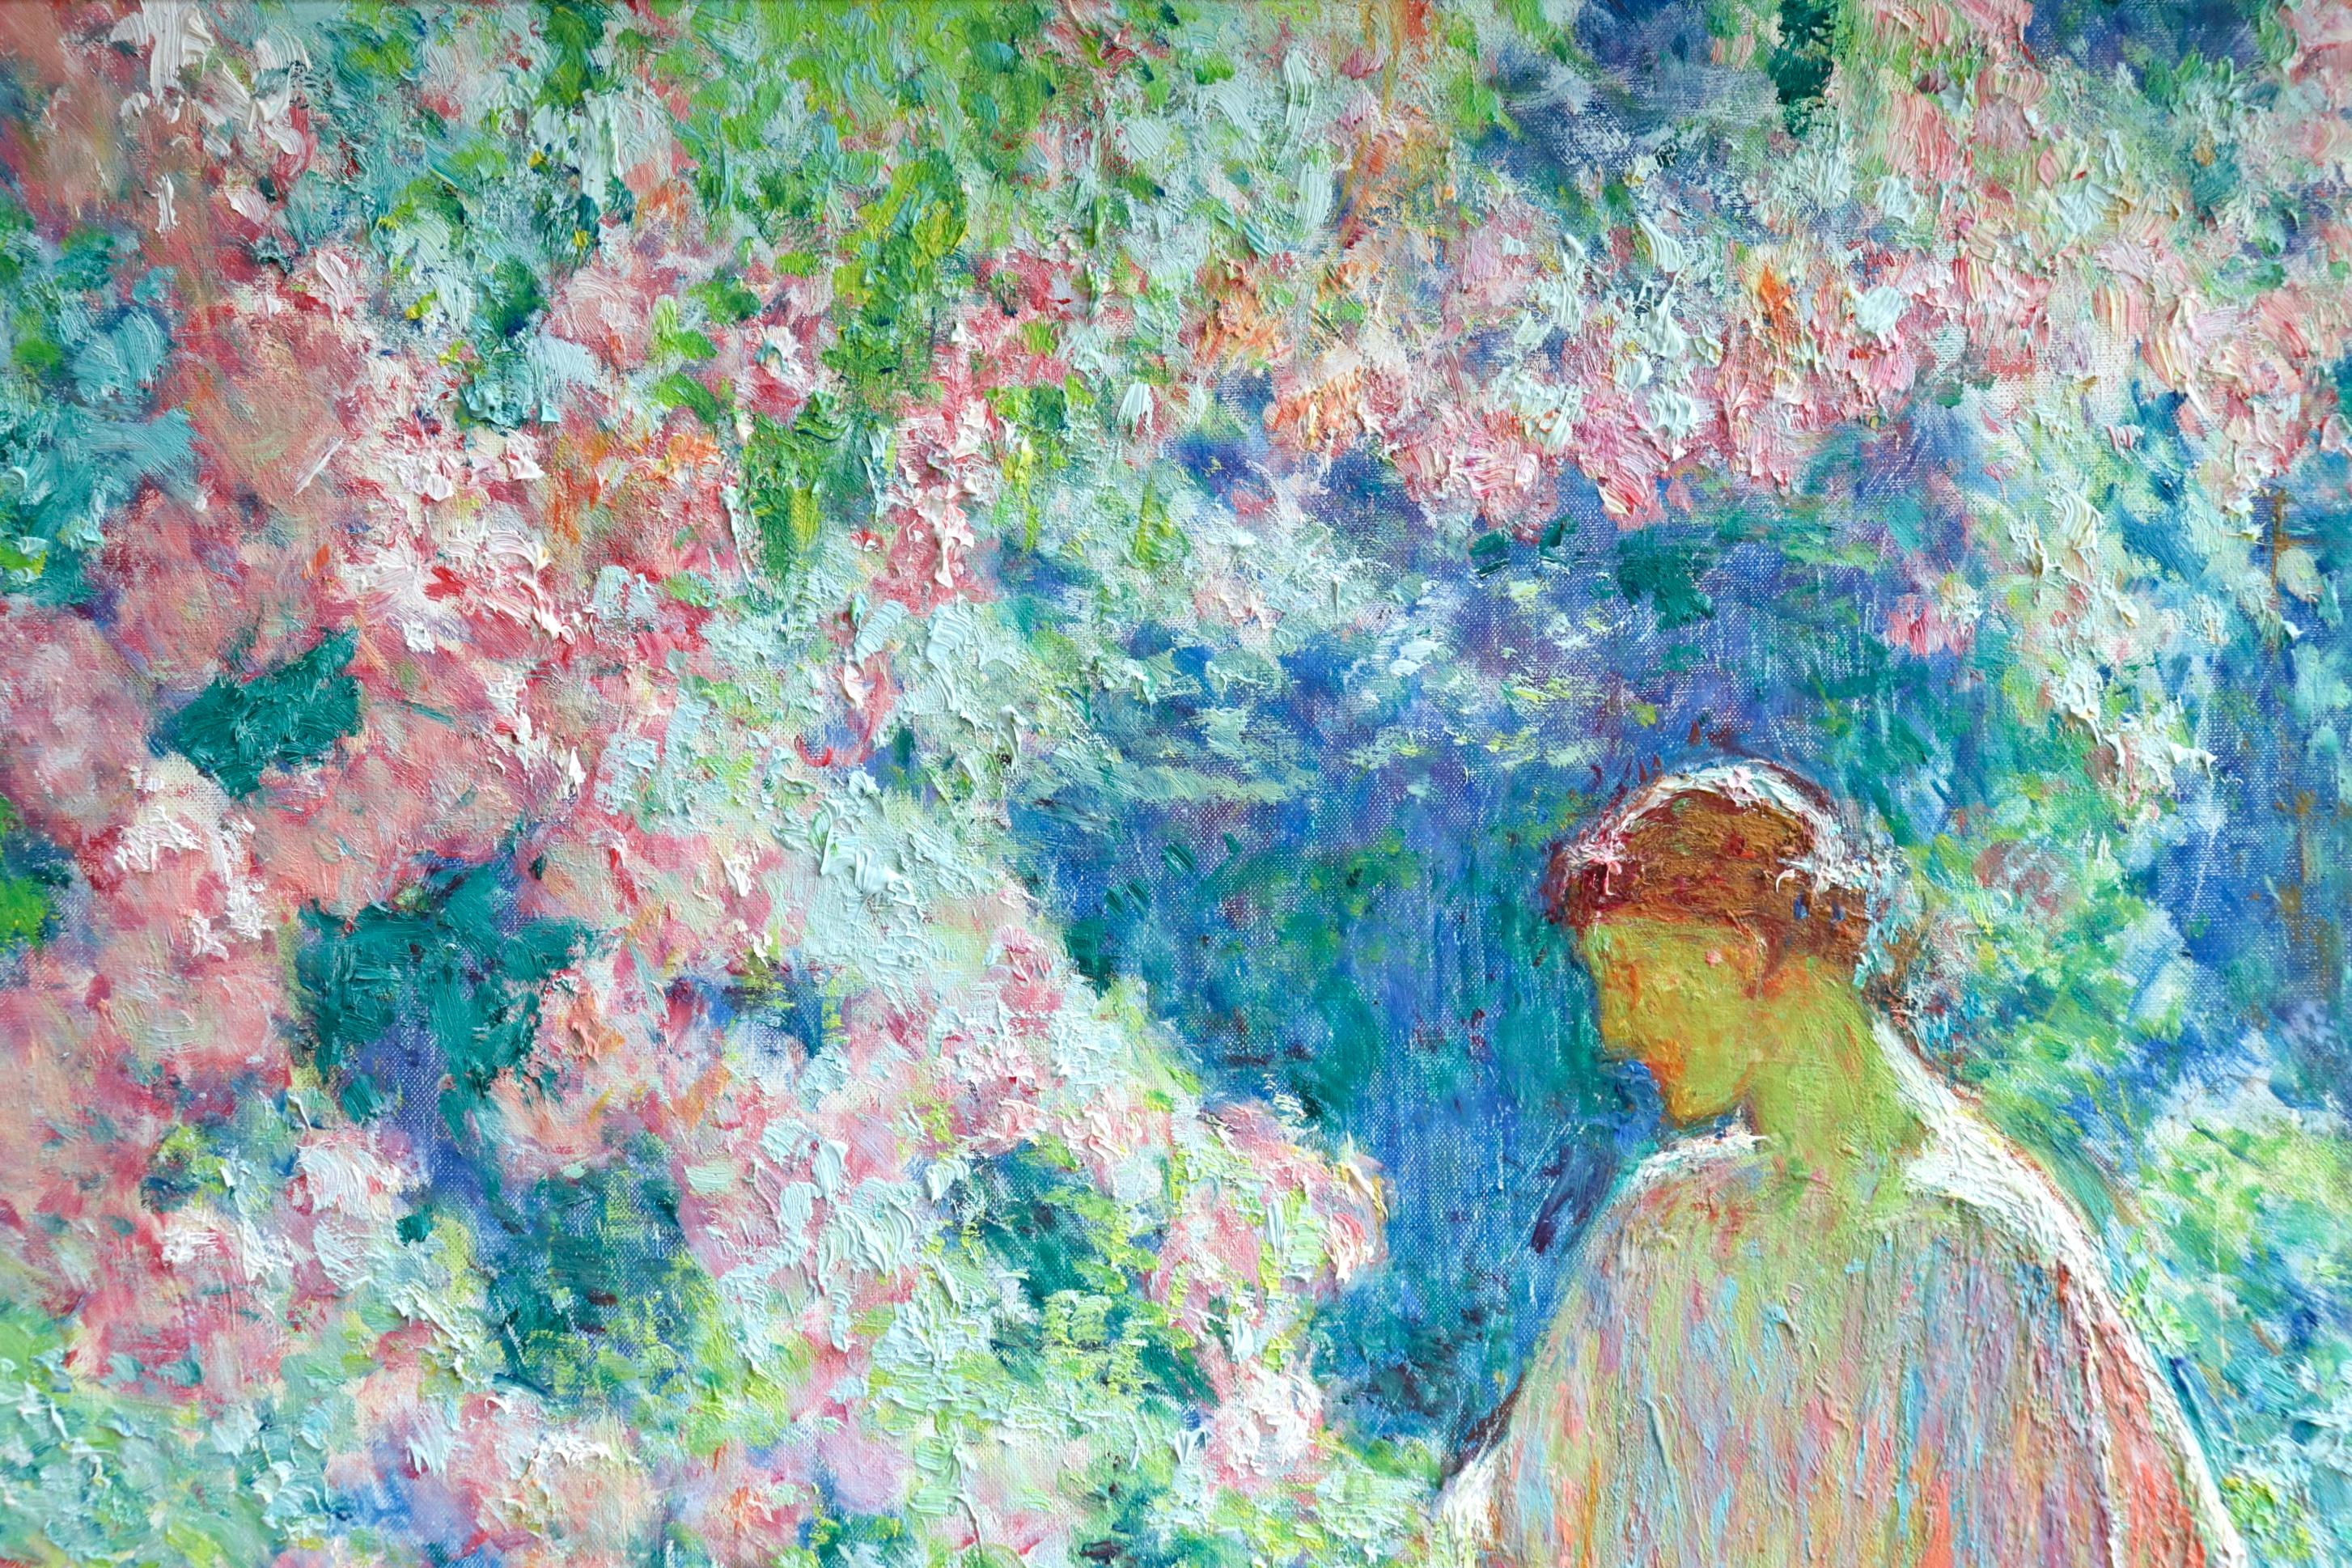 A stunning large oil on canvas circa 1940 by Post-Impressionist painter Octave Guillonet depicting a woman picking roses in a beautiful garden on a warm summer's day. Signed lower right. Framed dimensions are 33 inches high by 28.5 inches